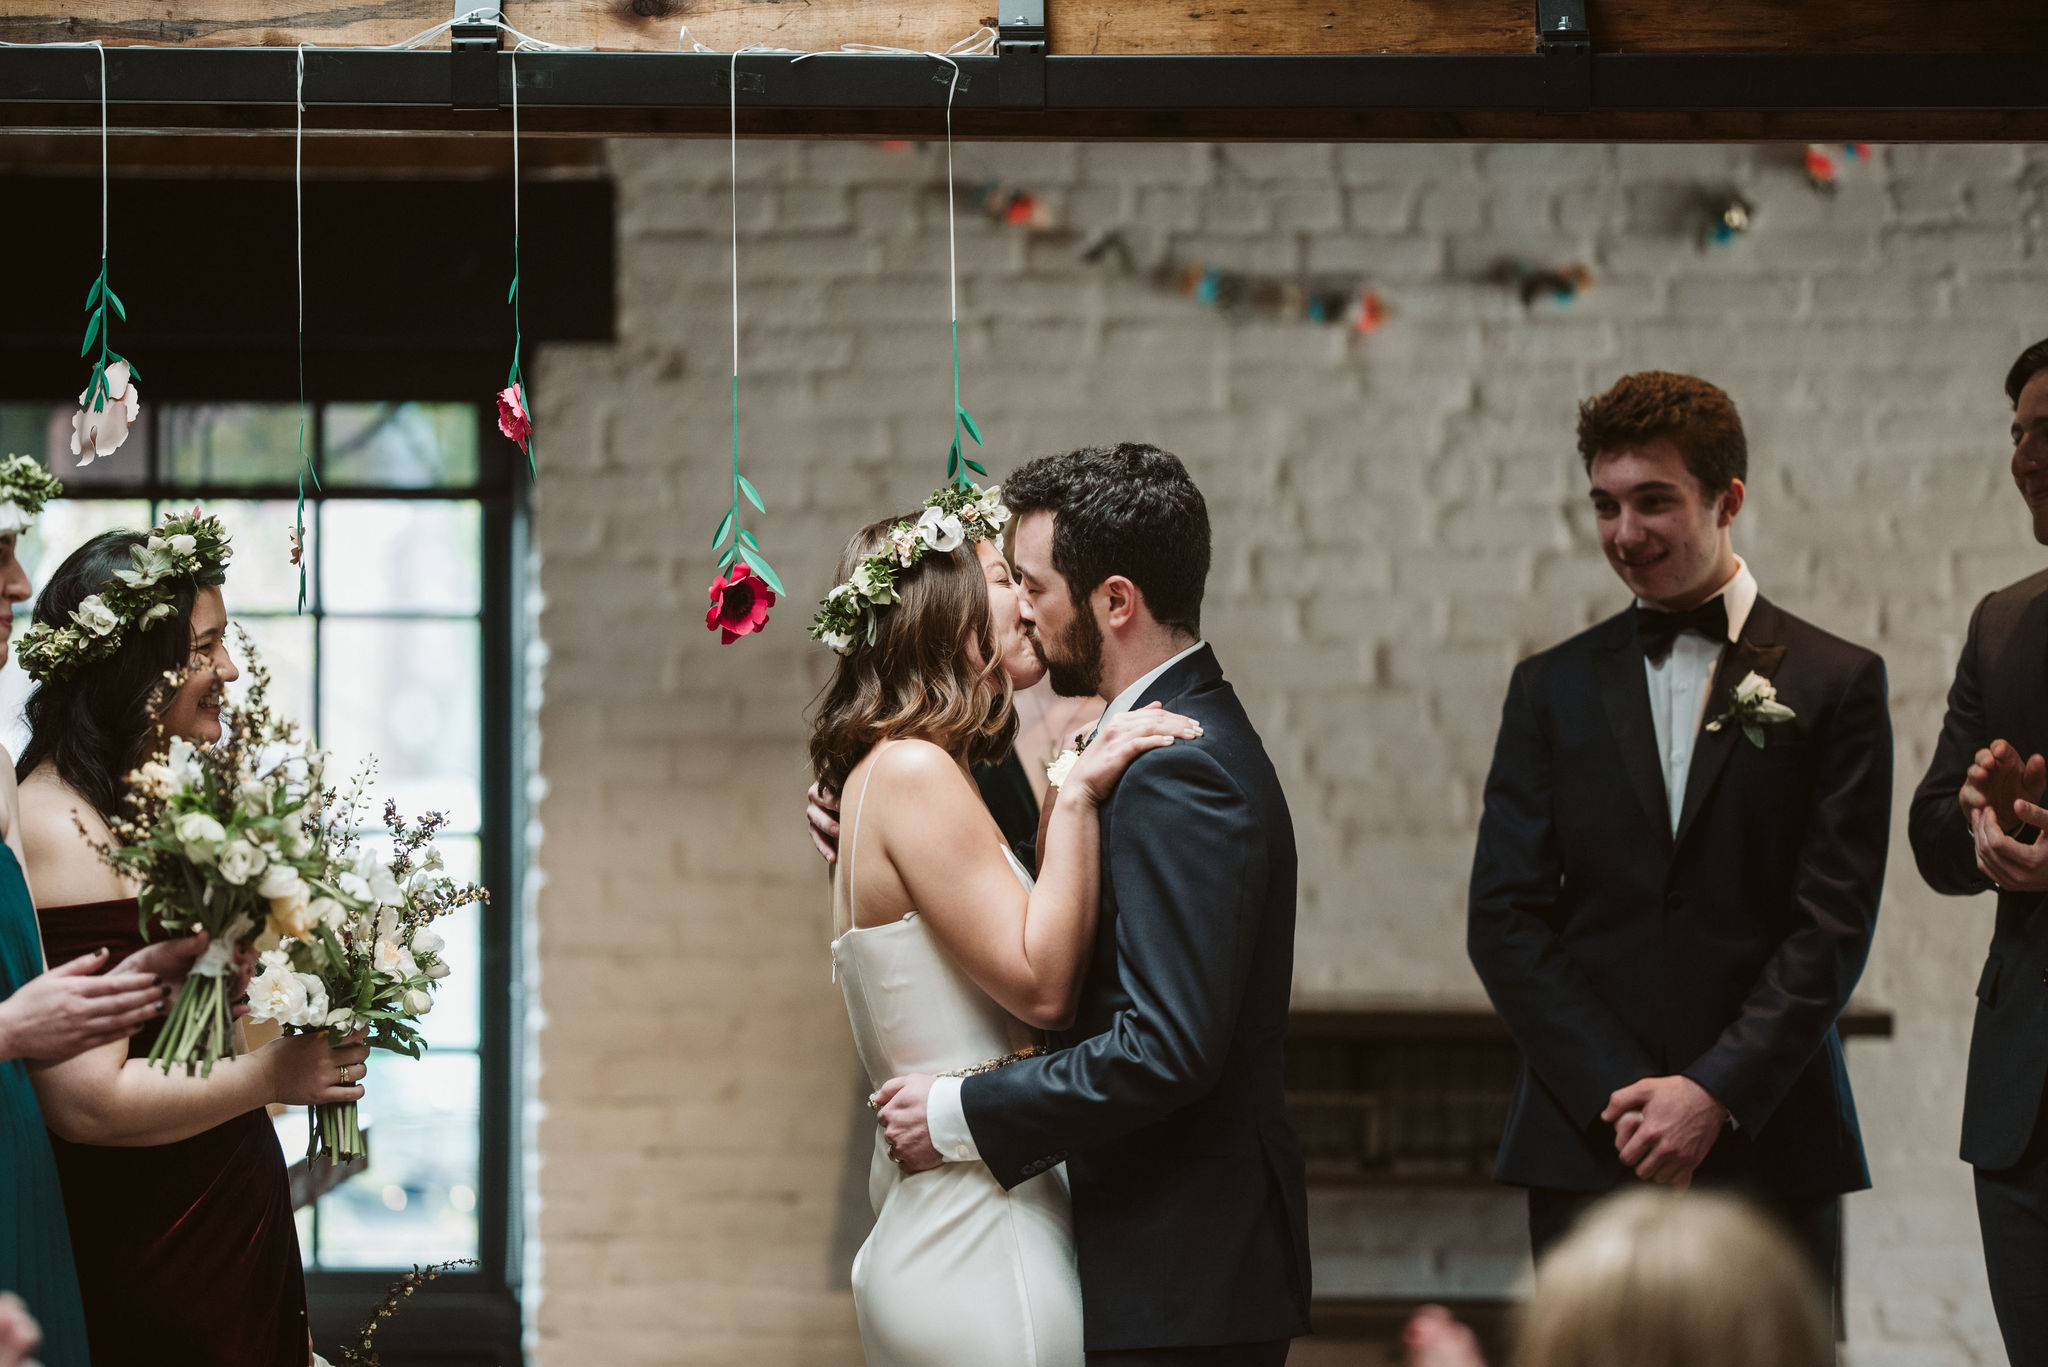  Washington DC, Baltimore Wedding Photographer, Alexandria, Old Town, Jewel Tone, Romantic, Modern, Virtue Feed &amp; Grain, Bride and Groom Share First Kiss, Just Married 